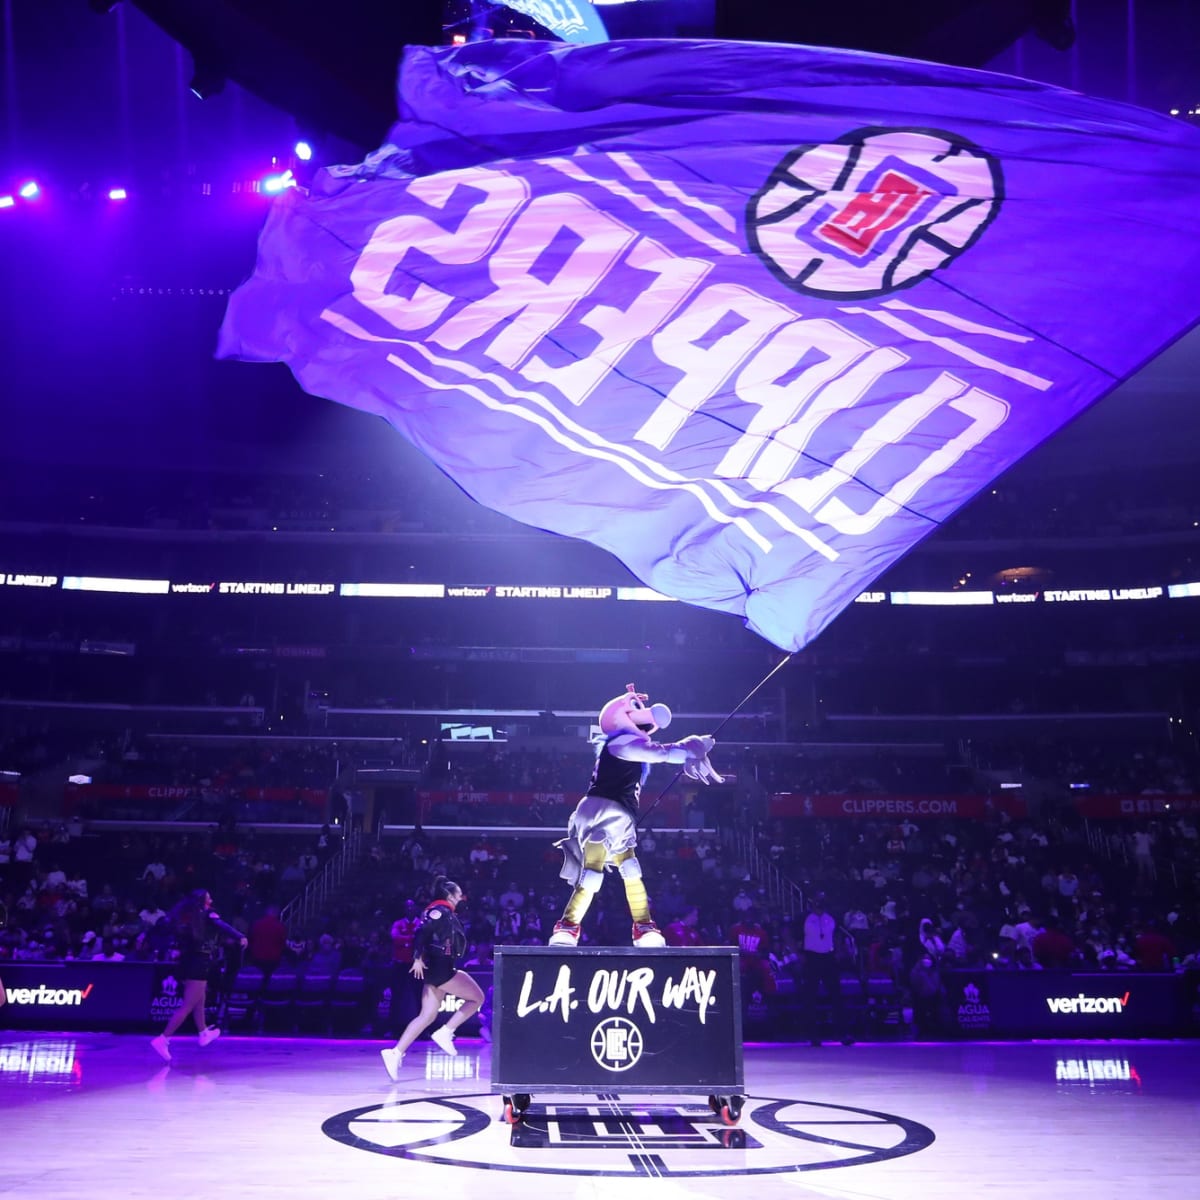 Clippers News: Clippers-Lakers dates set for 2022-23 season - Clips Nation